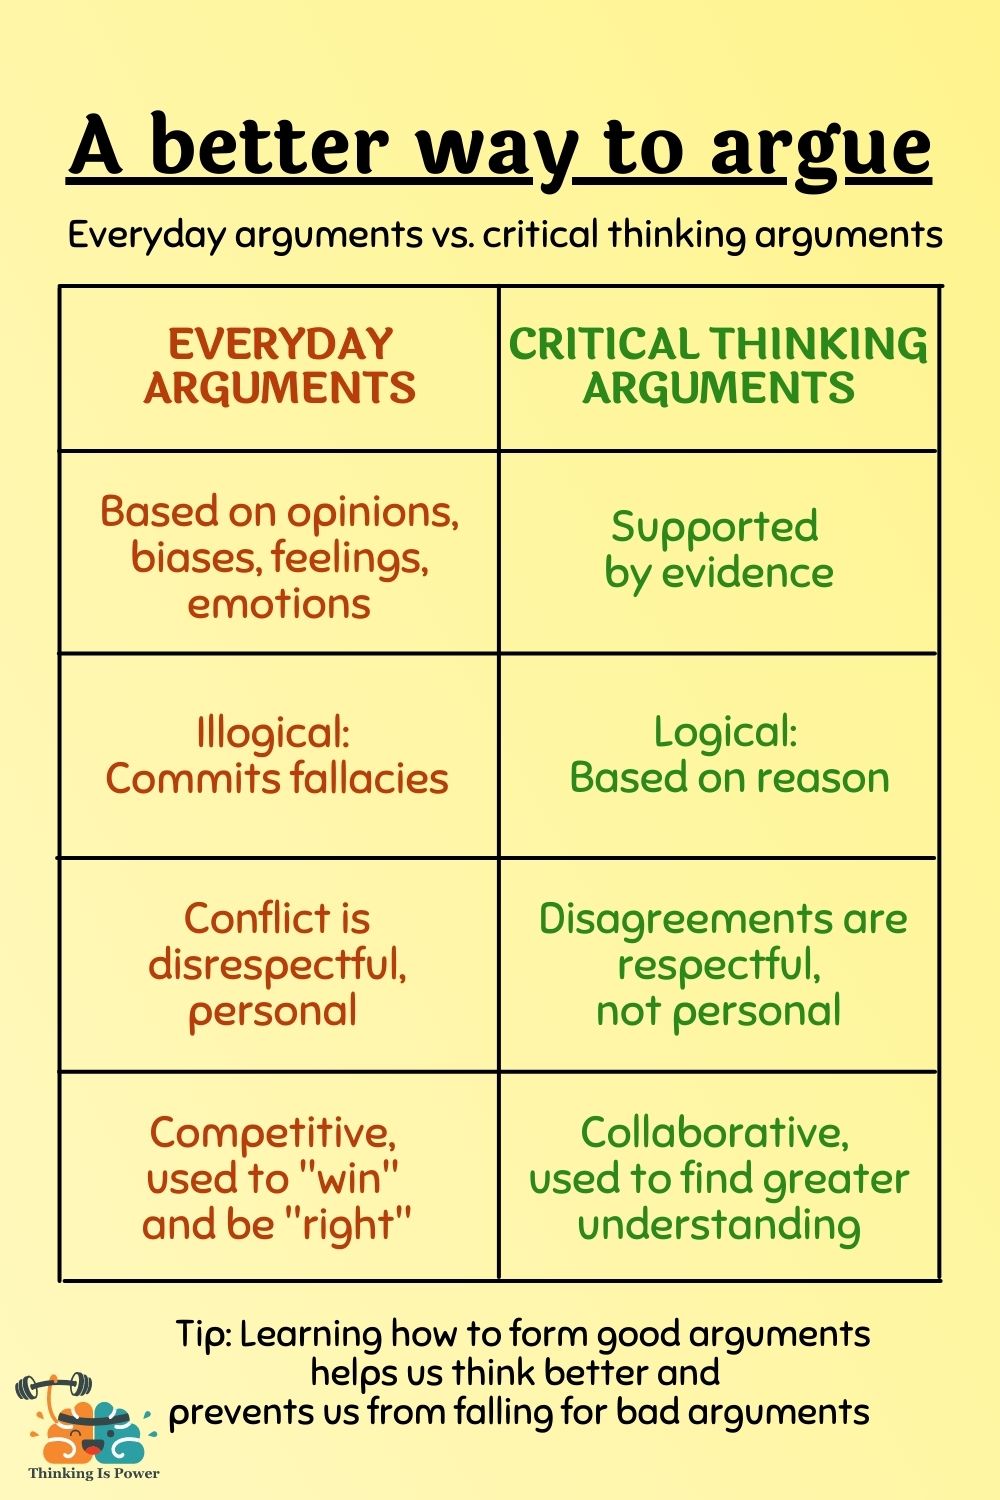 Everyday arguments are different than critical thinking or science arguments; everyday arguments are based on biases and emotions, commit logical fallacies, attack the source, and are used to win